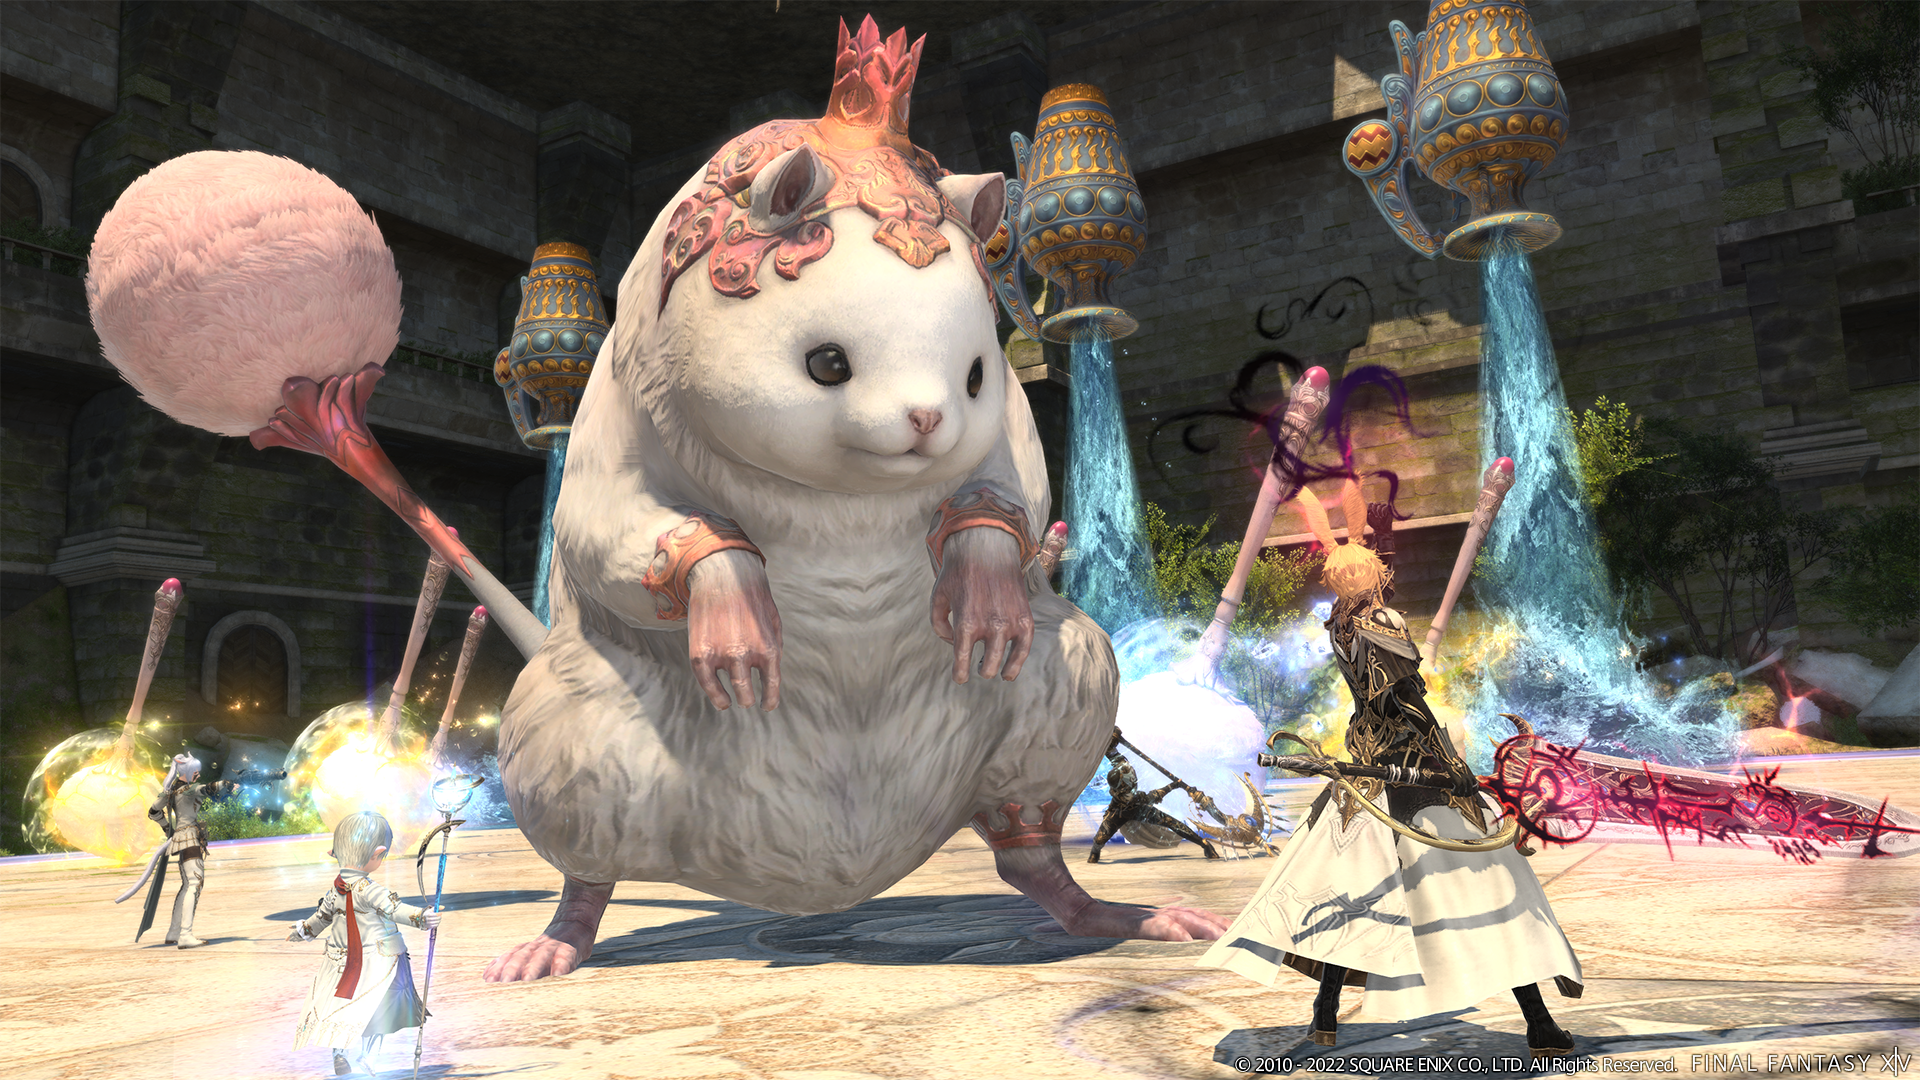 Final Fantasy 14 Online patch 6.2, Buried Memory, has a release date.